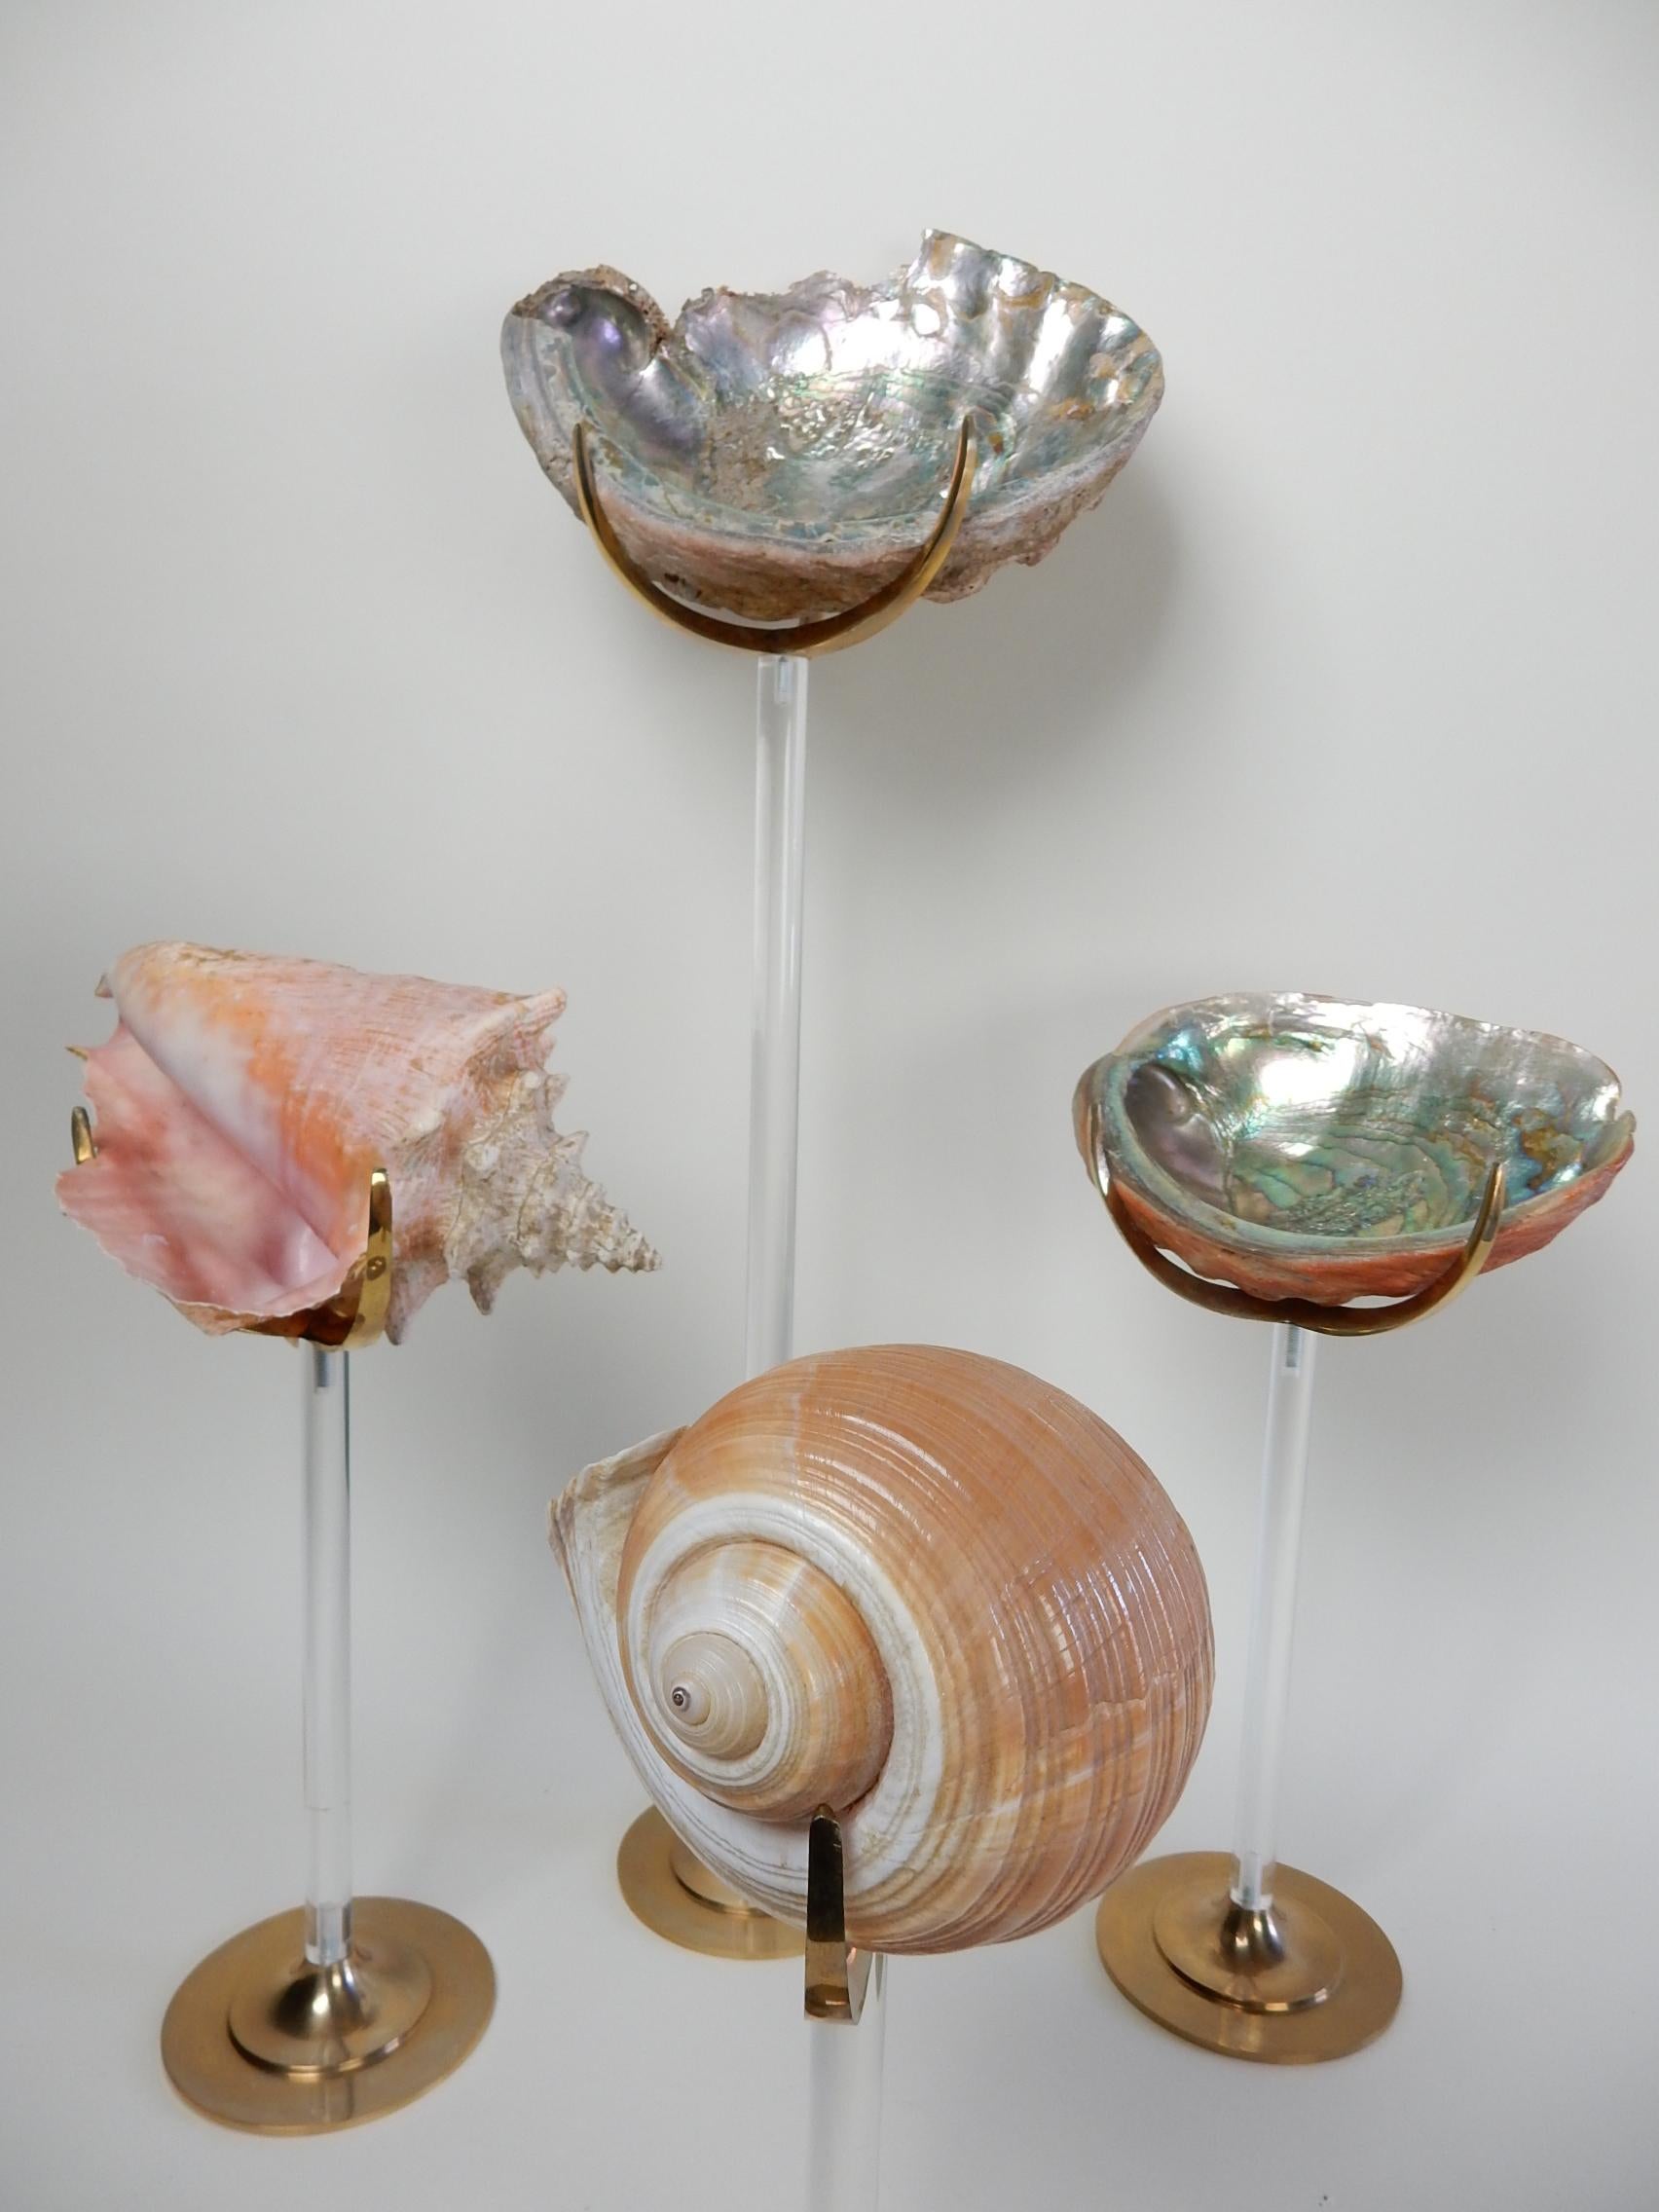 A set of four Arthur Court designed natural sculptures consisting of 4 brass and Lucite stands with collected shell specimens.
Arthur Court (1928-2015) was a renowned California designer, mineral enthusiast and outdoor adventurer. Using nature as